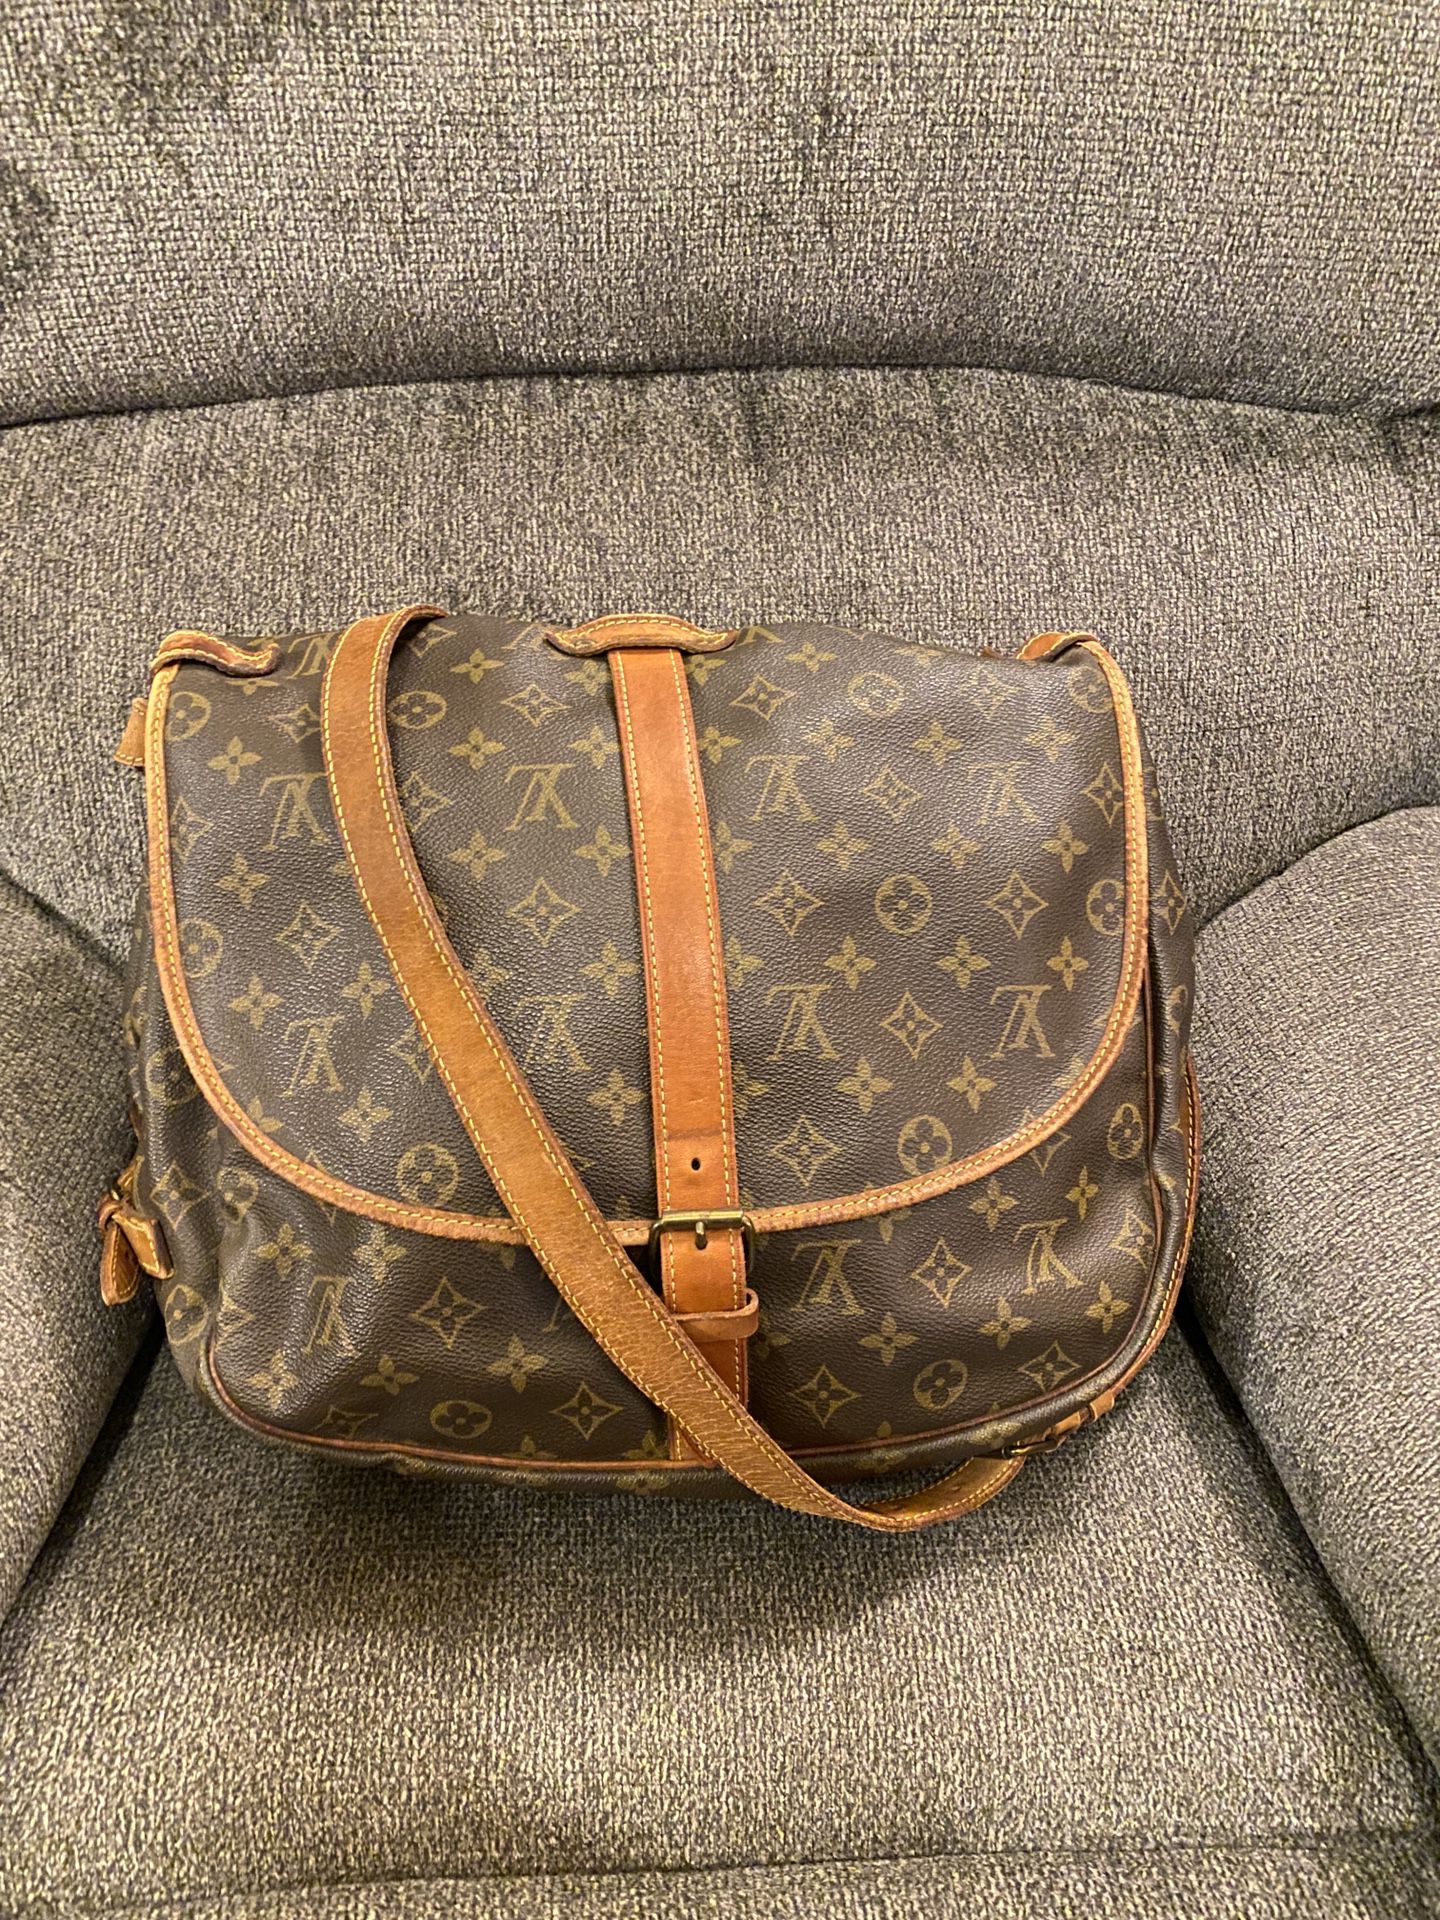 Louis Vuitton Saumur 35-reserved for buymyjunk09 for Sale in